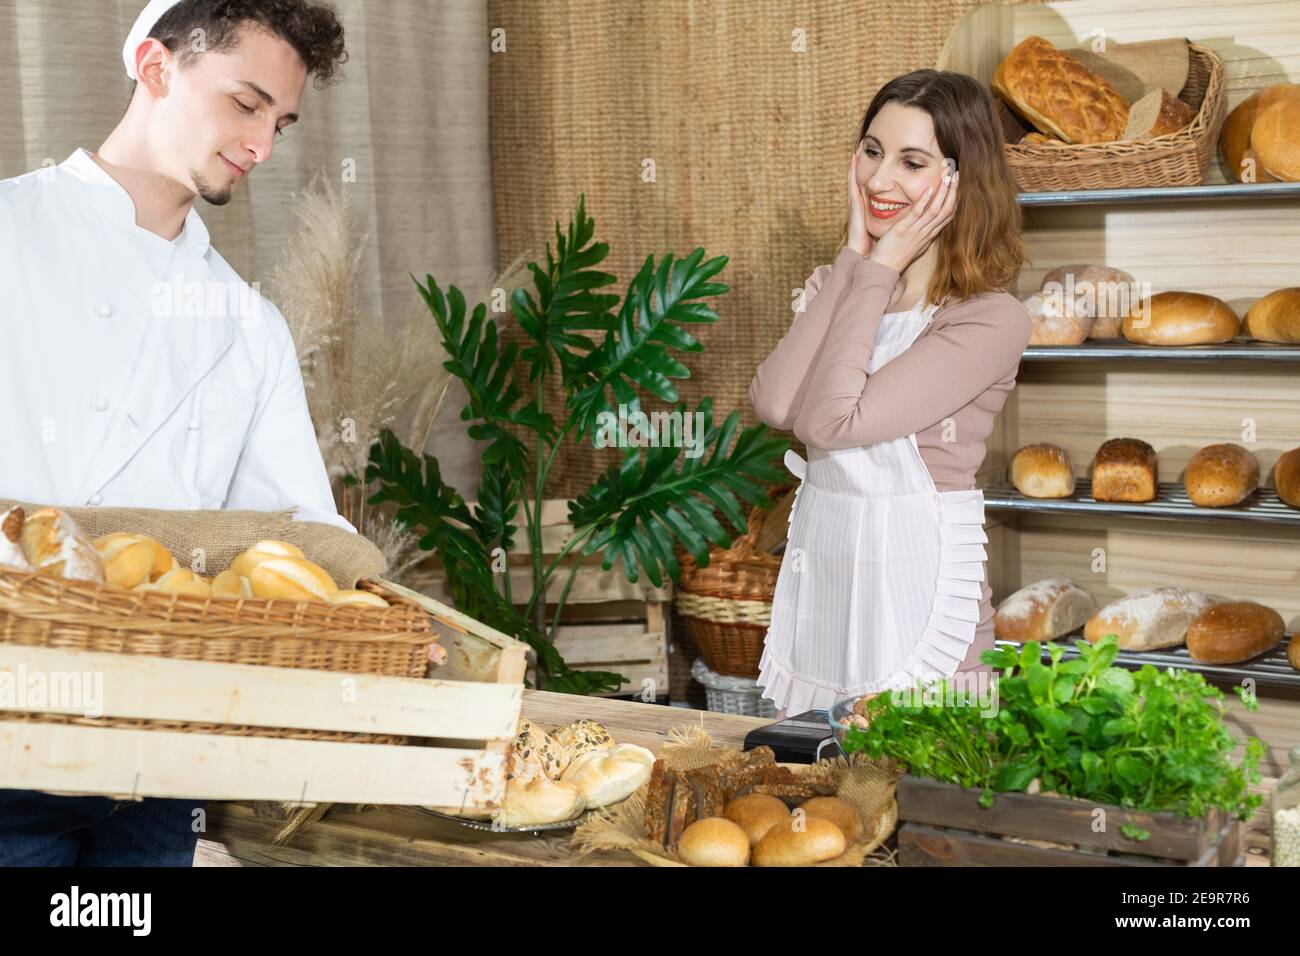 The new saleswoman was completely surprised by the delivery of bread brought by a handsome baker. A multi-generation baking tradition. Stock Photo